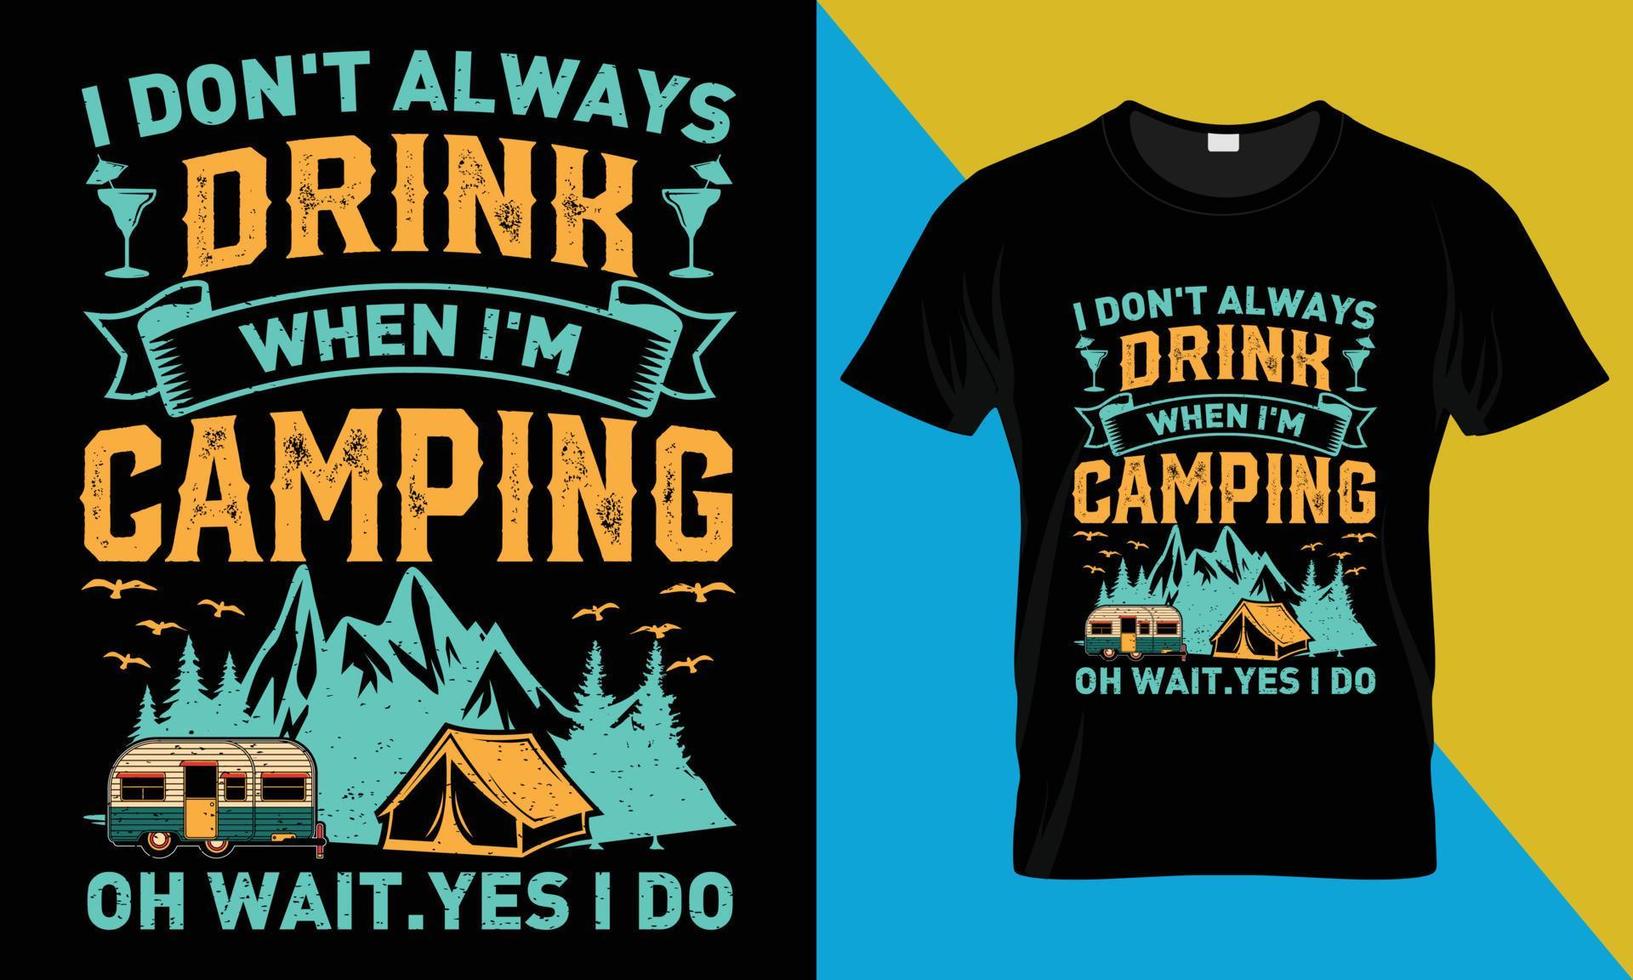 Camping t-shirt design, I Don't Always Drink when i'm camping oh wait.yes i do vector